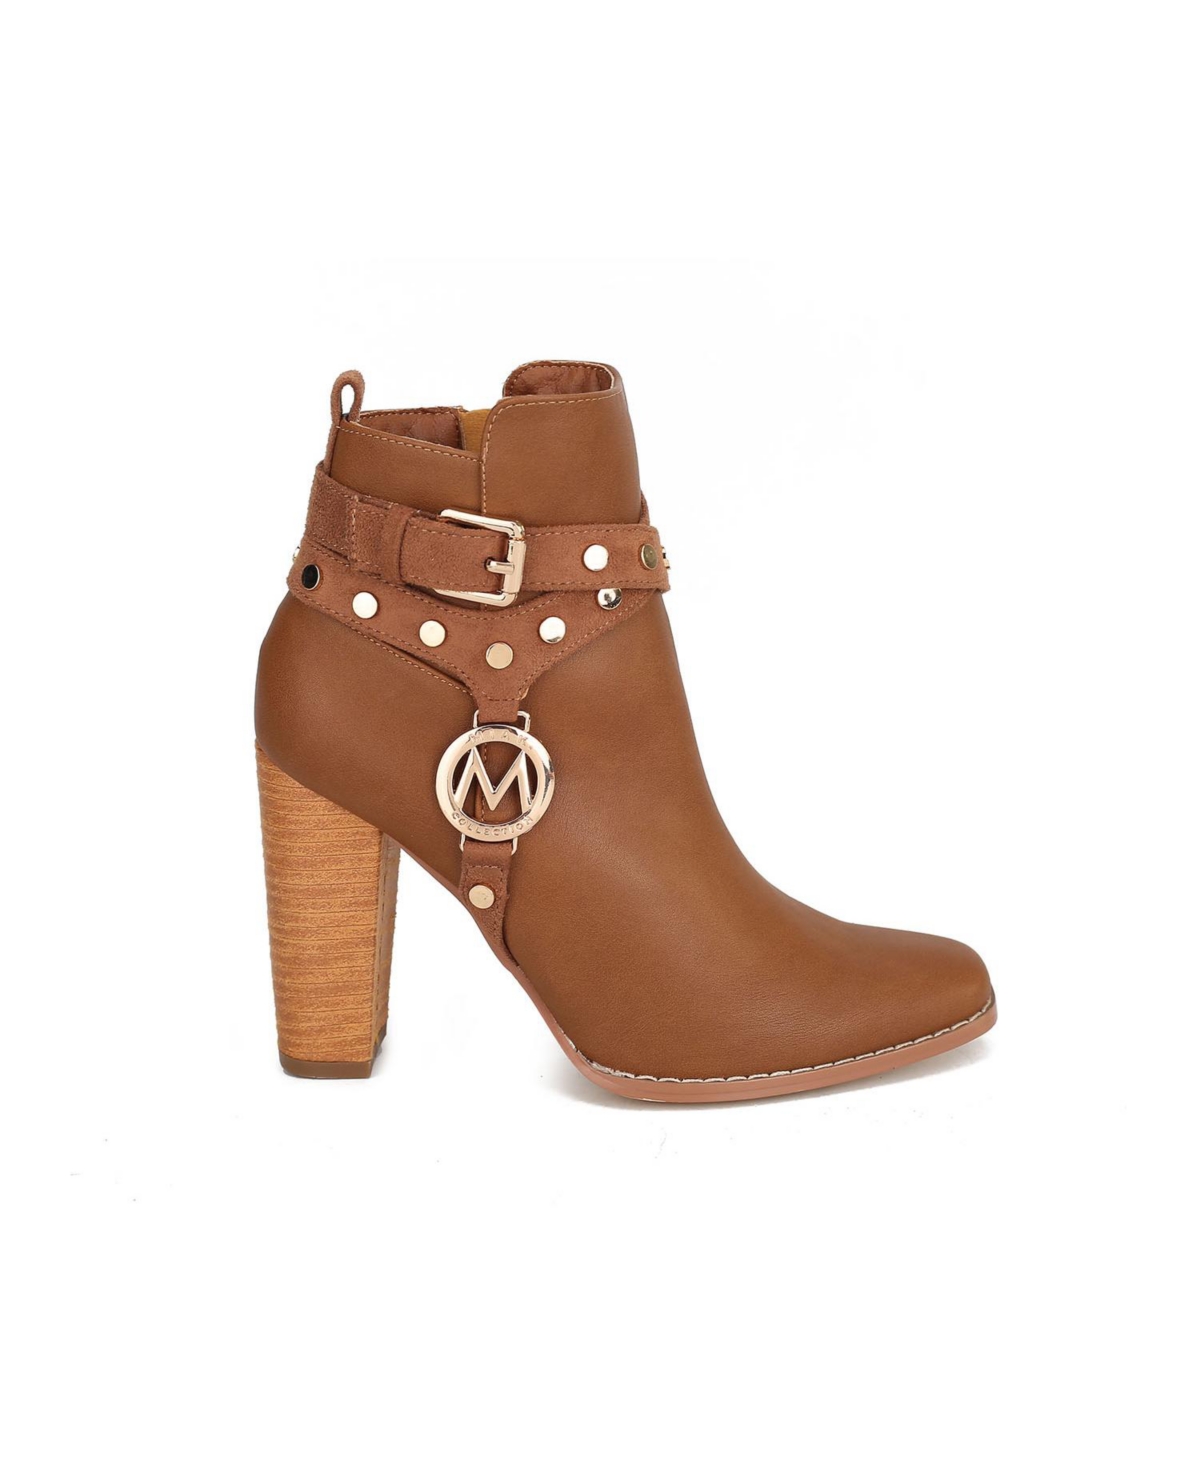 Brooke Ankle Boot by Mia - Cognac